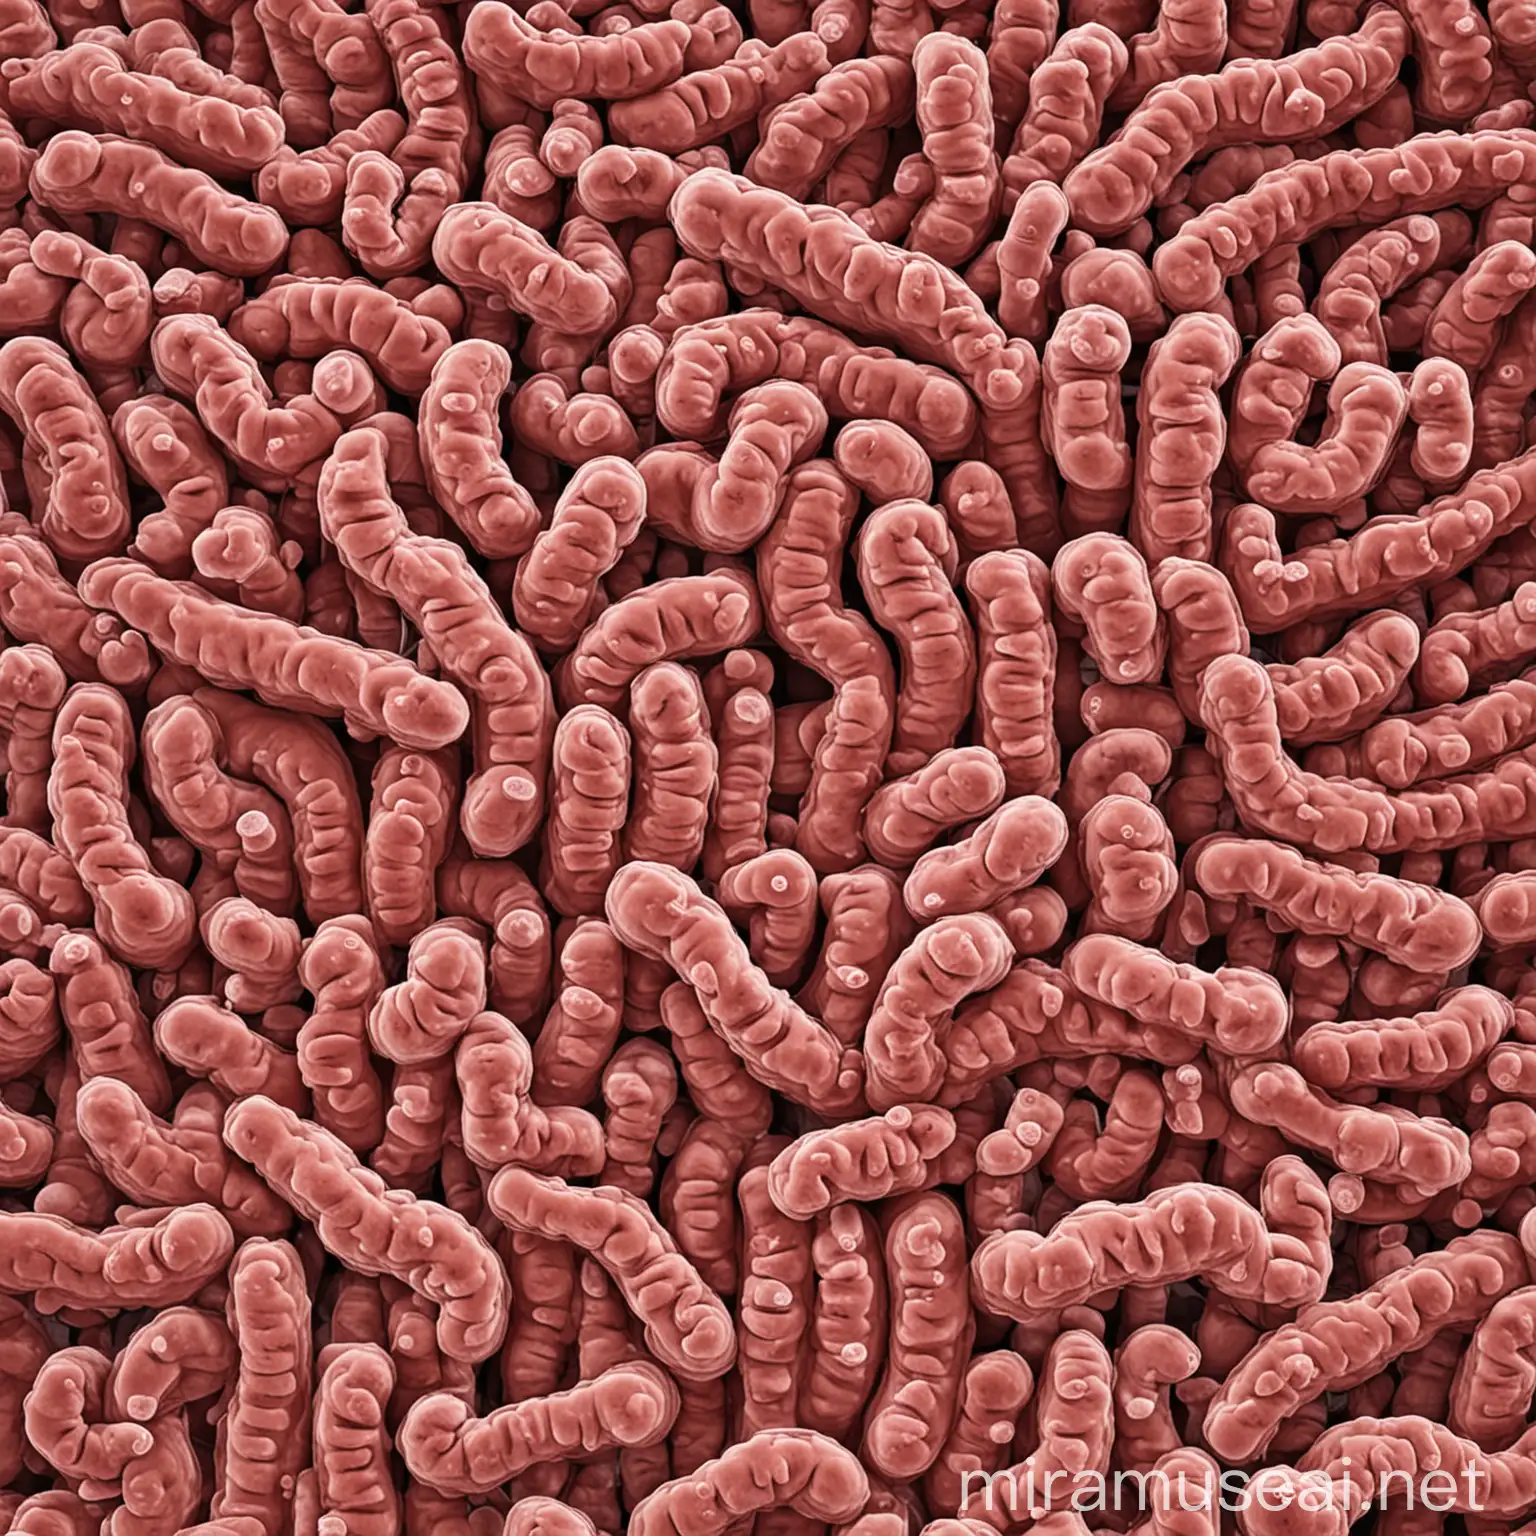 Detailed Illustration of Bacteria in the Human Intestine